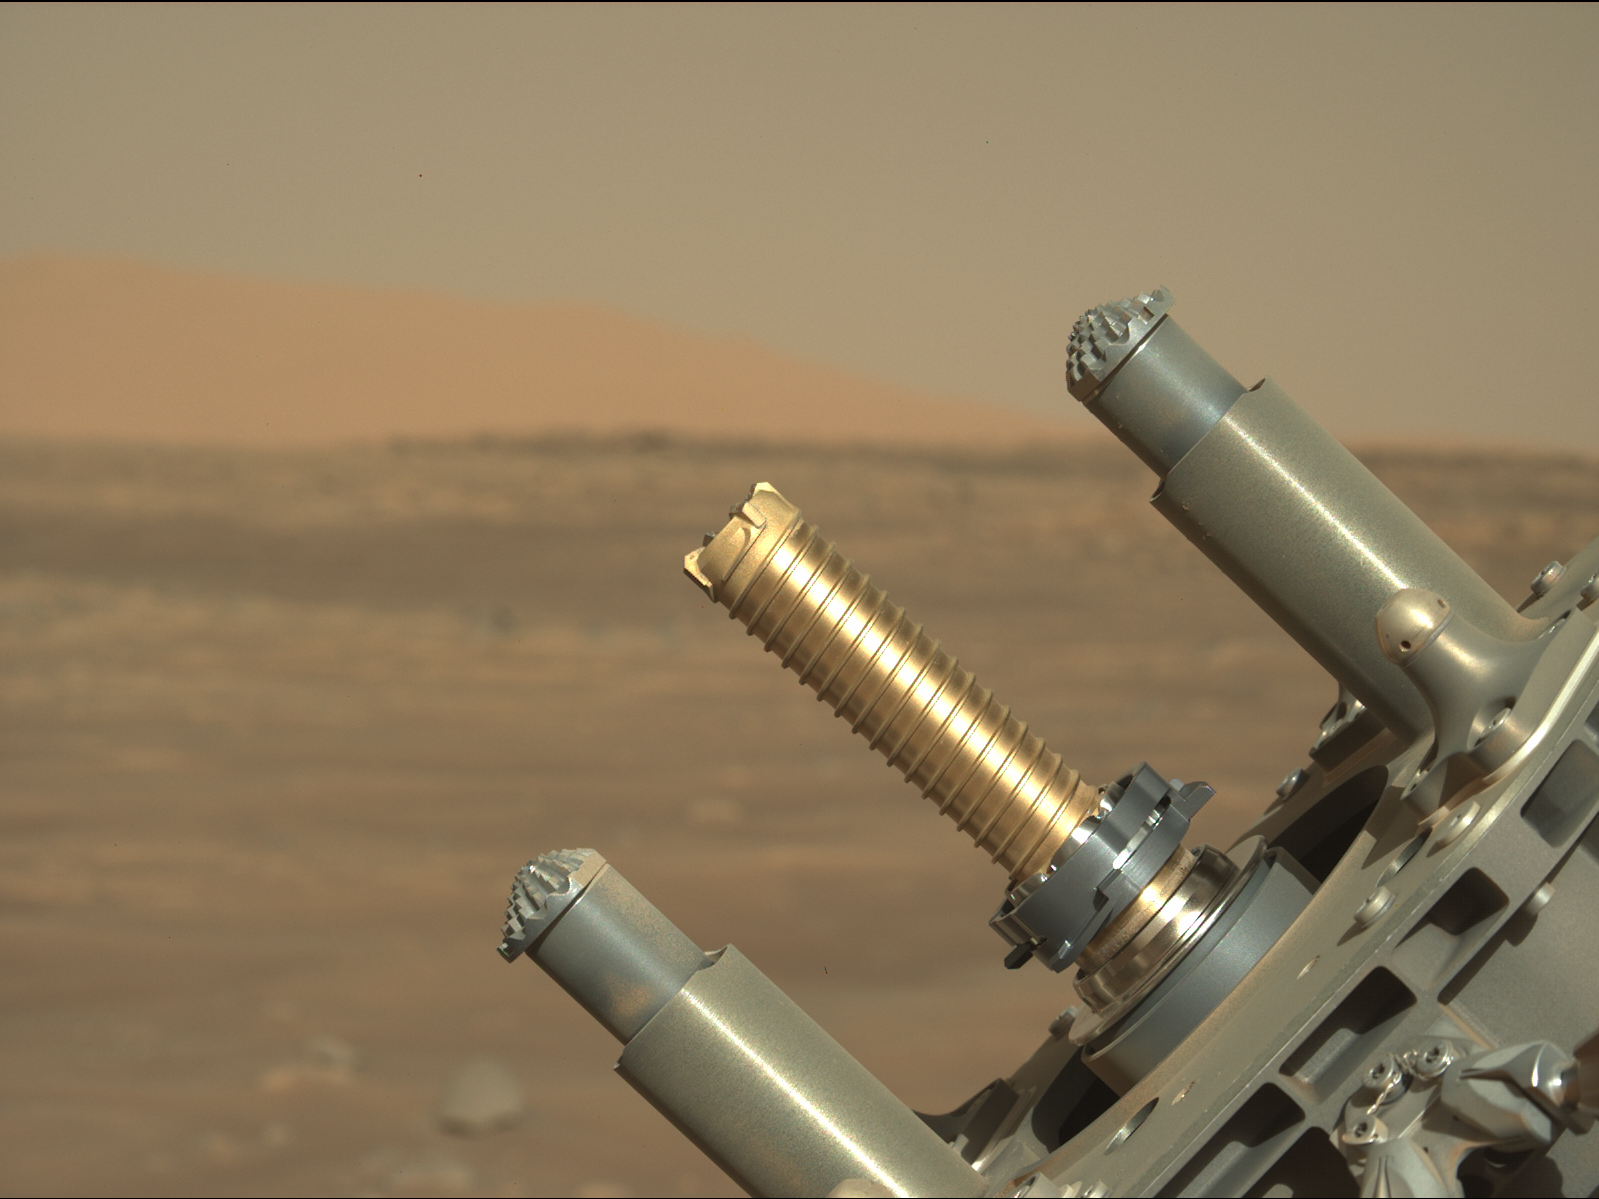 perseverance rover robotic arm holds up golden tube for coring samples against mars plains background